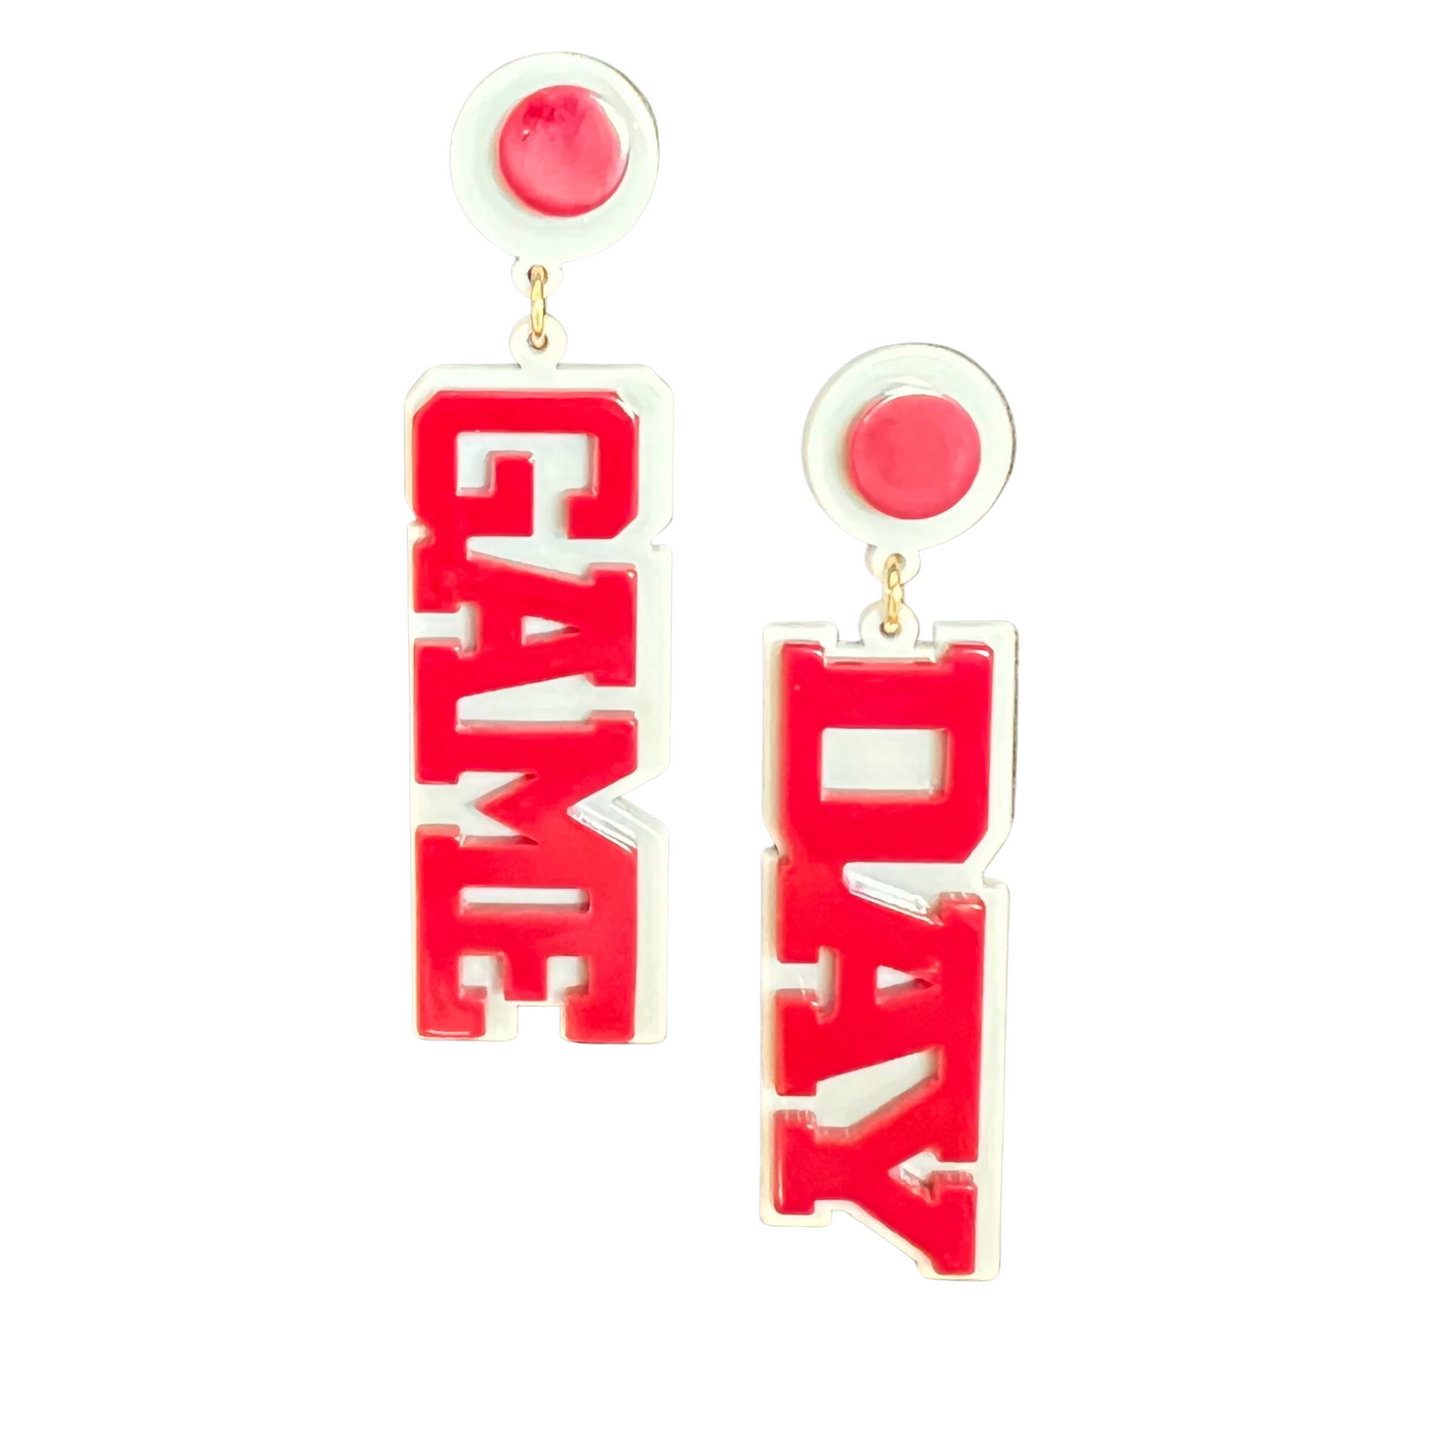 Game Day acrylic earrings in red and grey